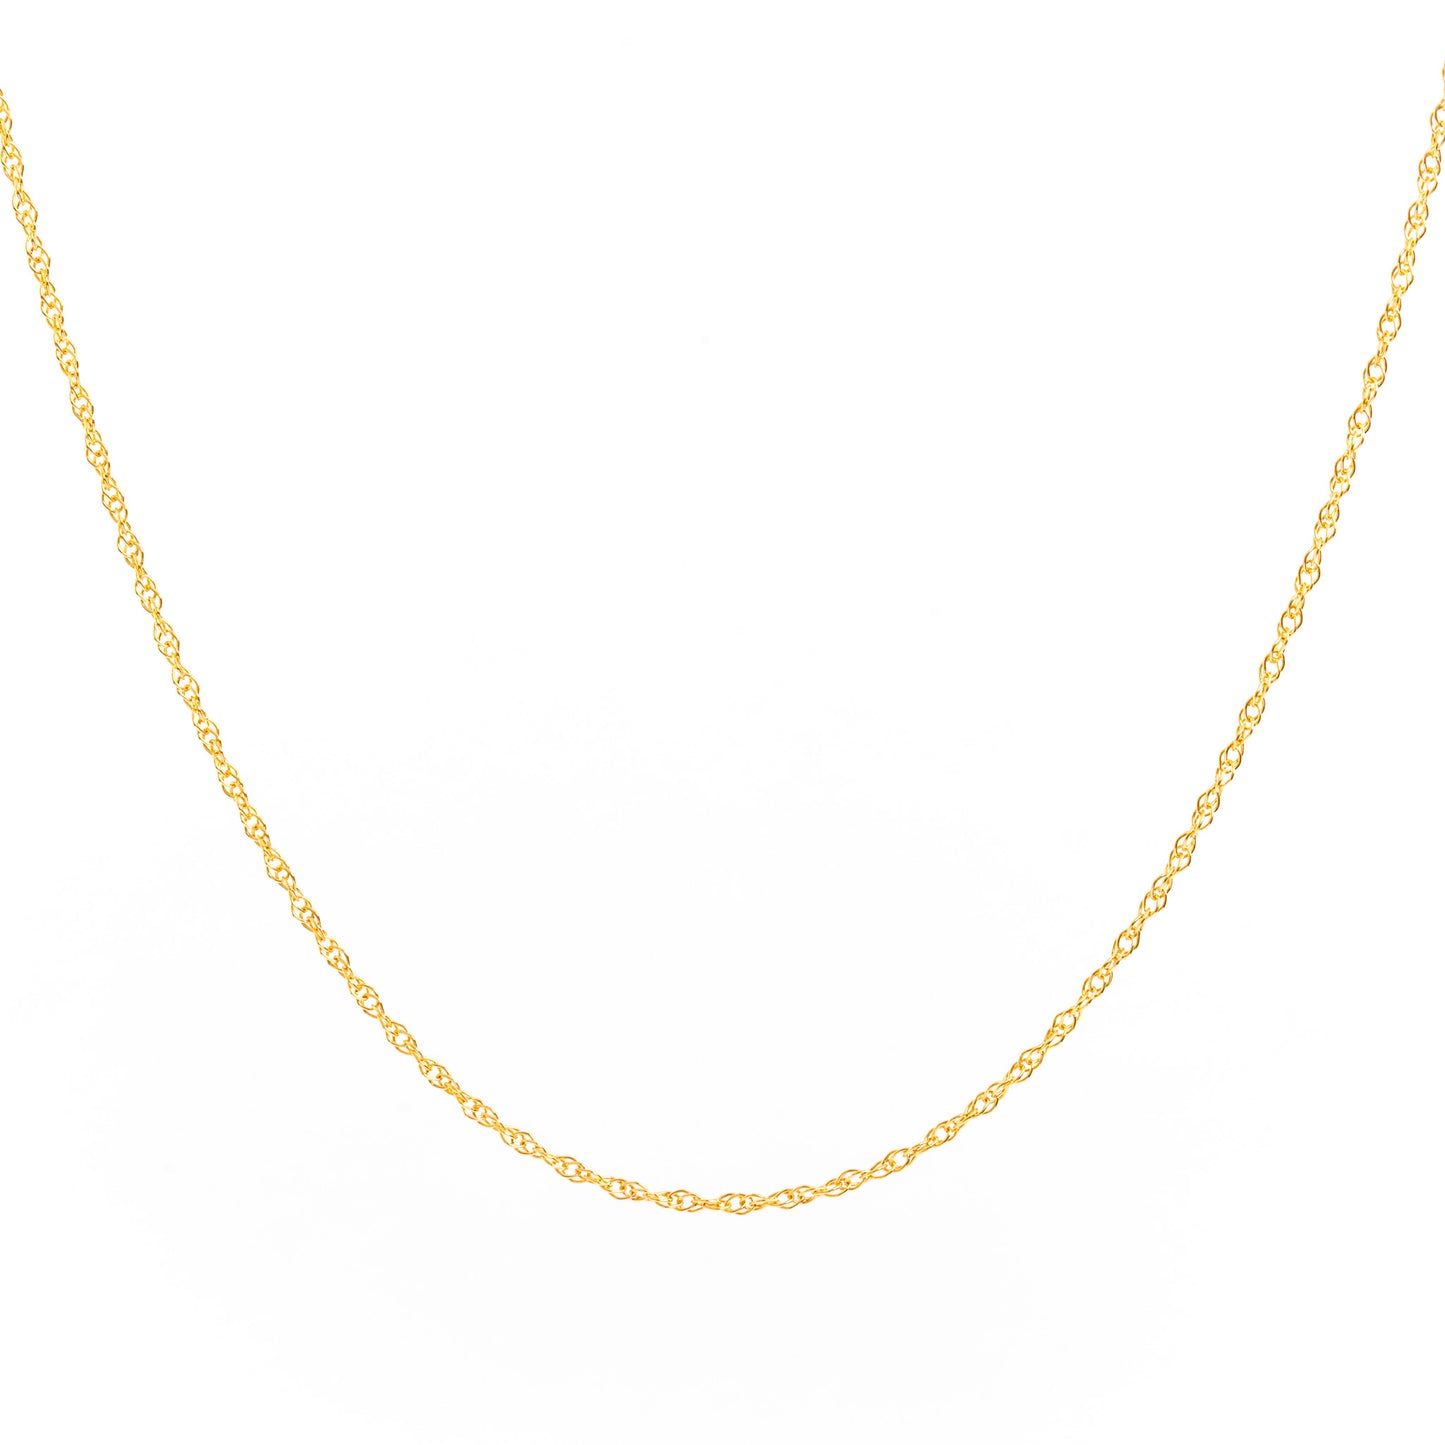 Minimal Gold Rope Chain Necklace